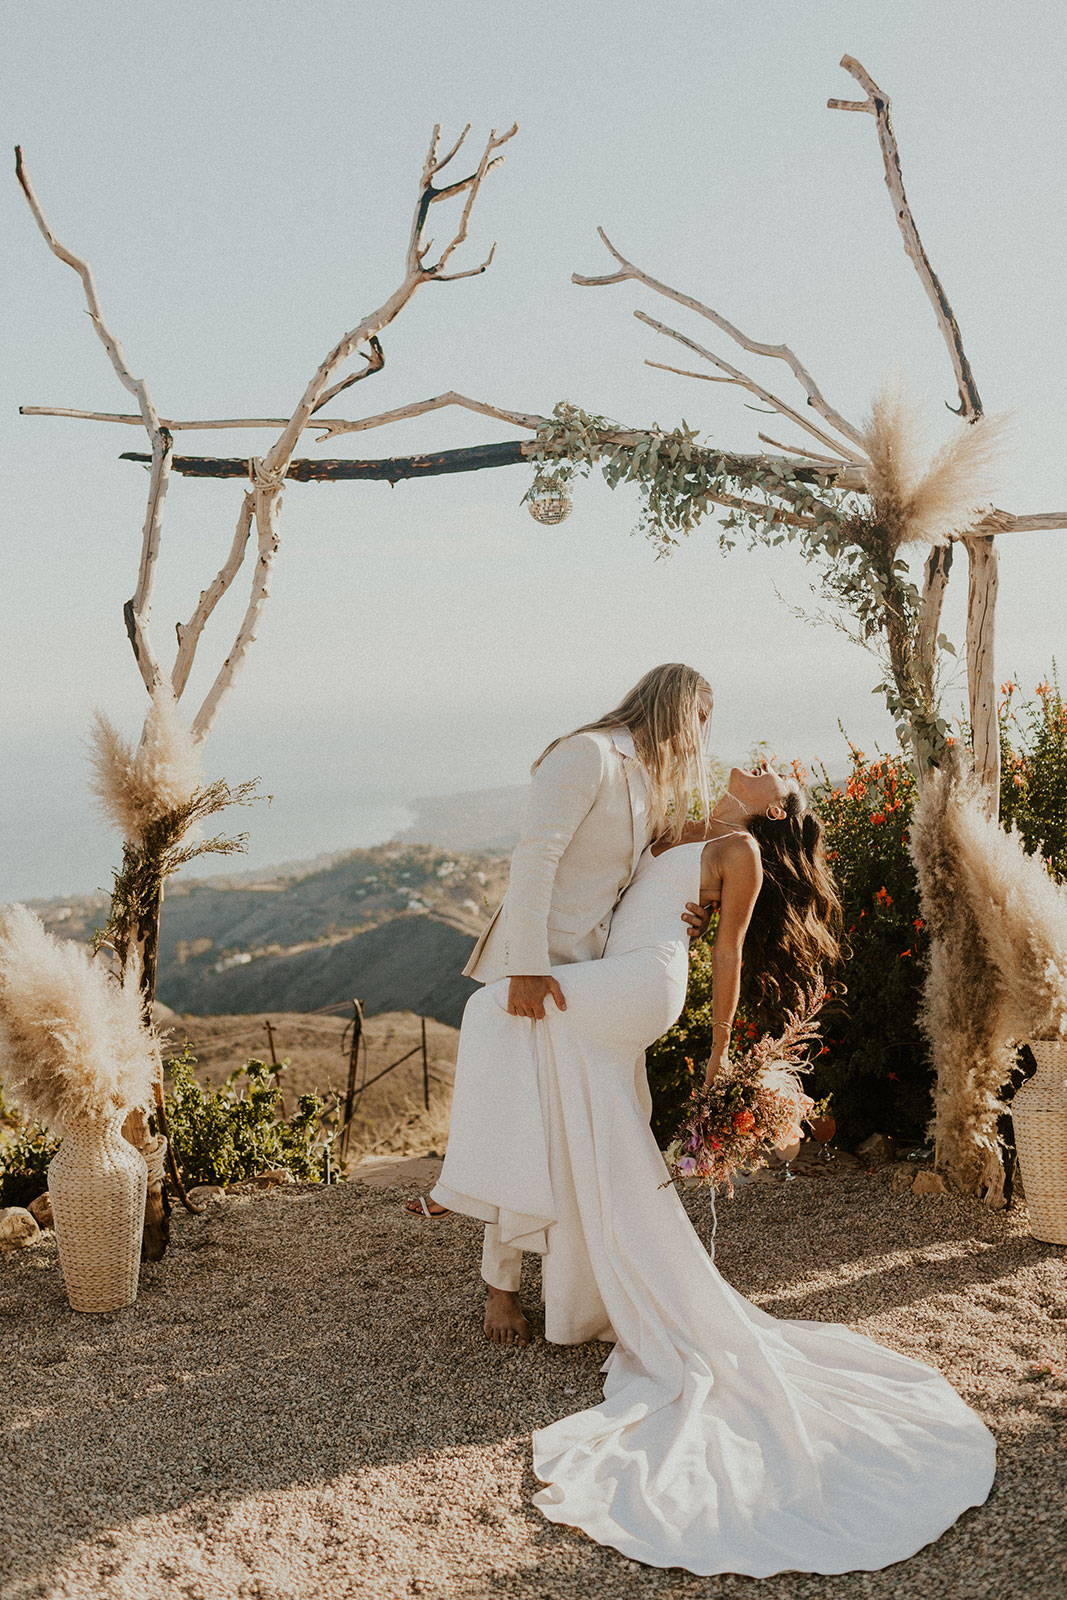 Bride and groom in front of wooden stick arbor